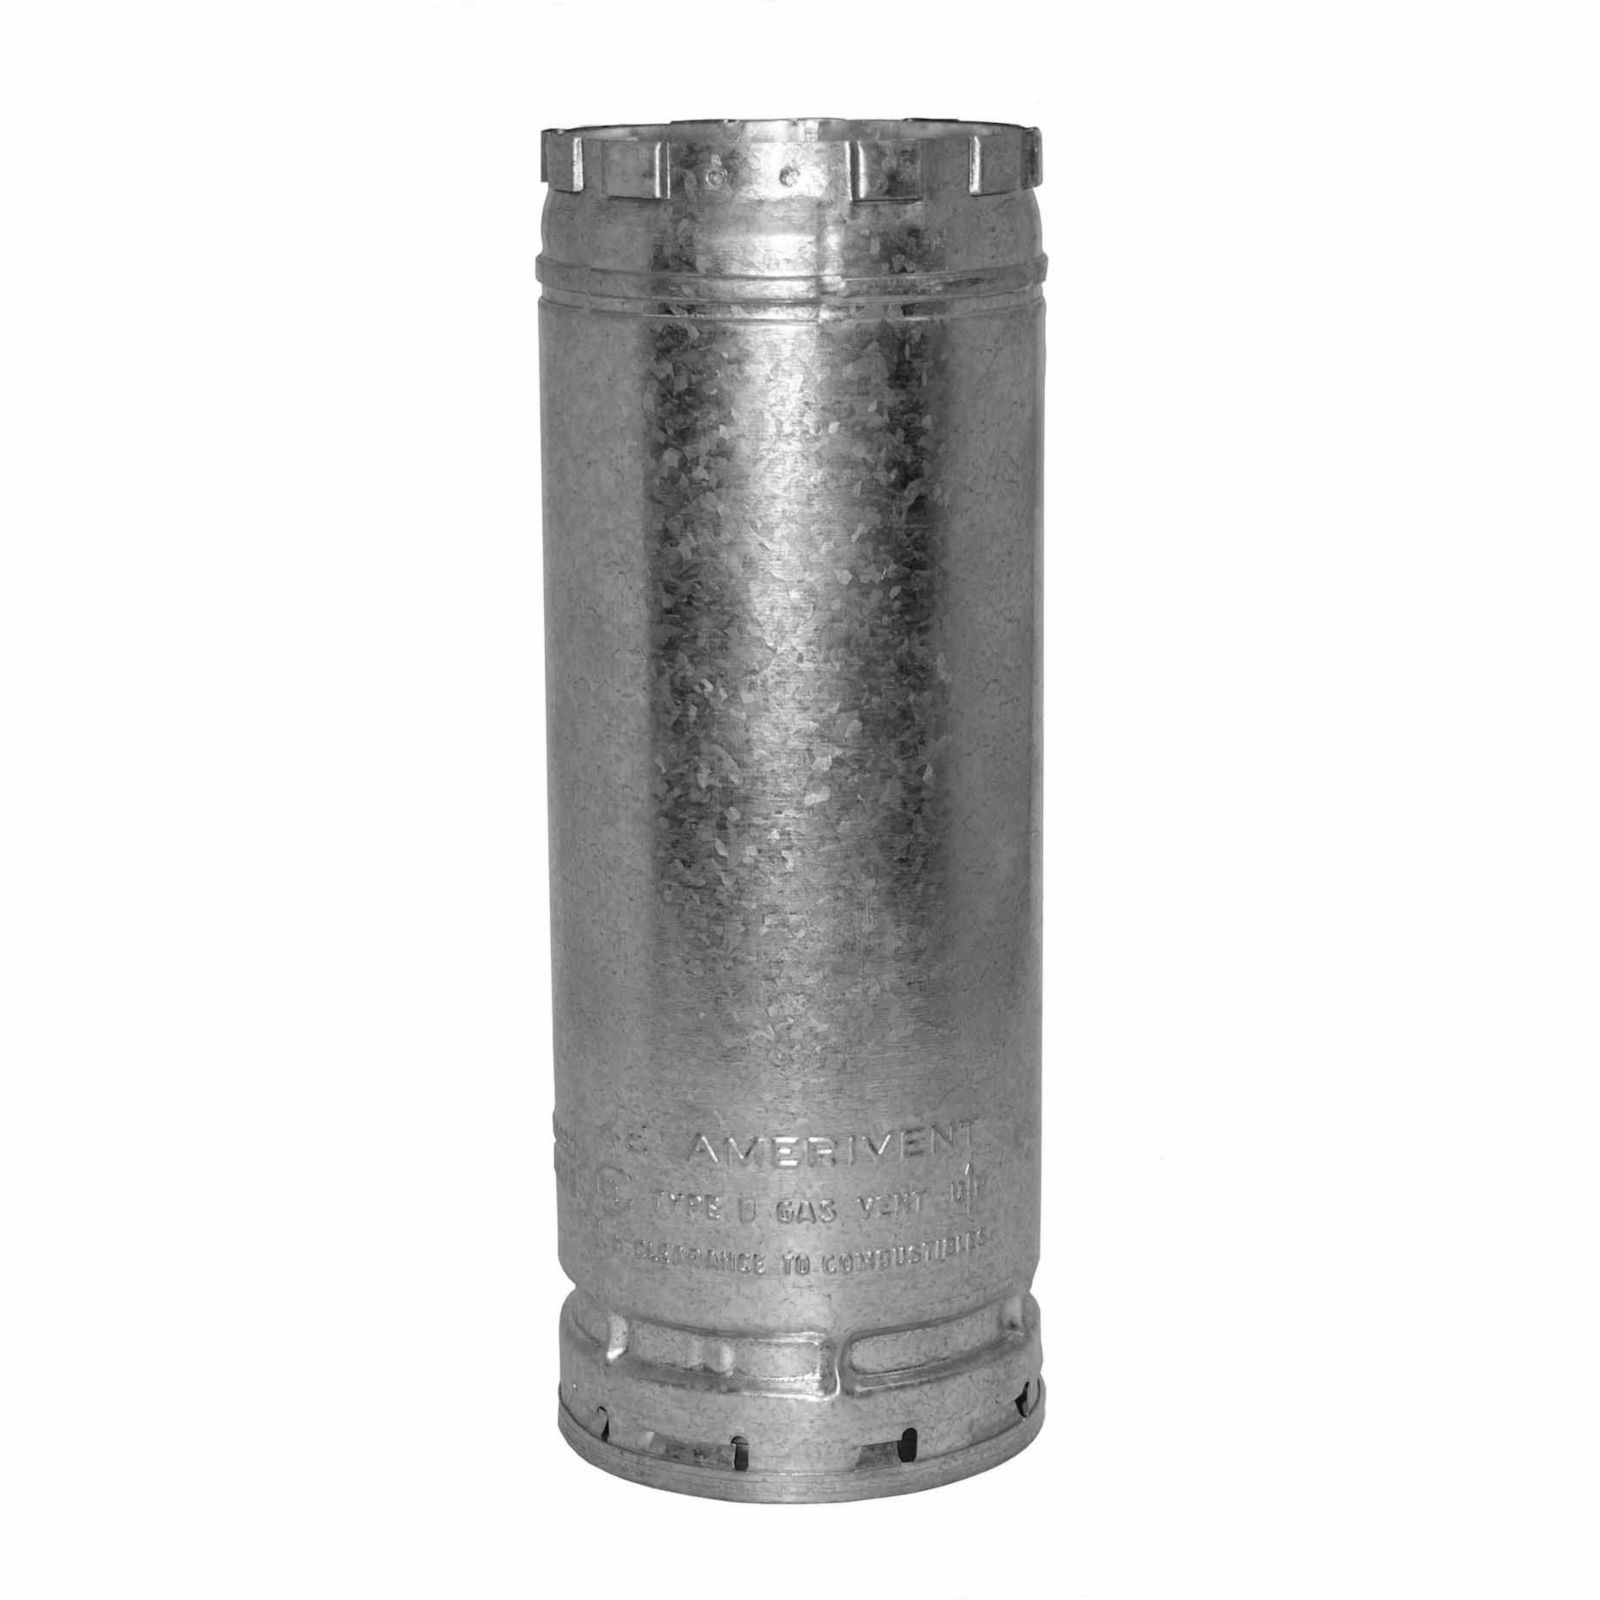 AmeriVent 5E3 - Pipe Section Type B Gas Vent, 5" Round X 36" Length